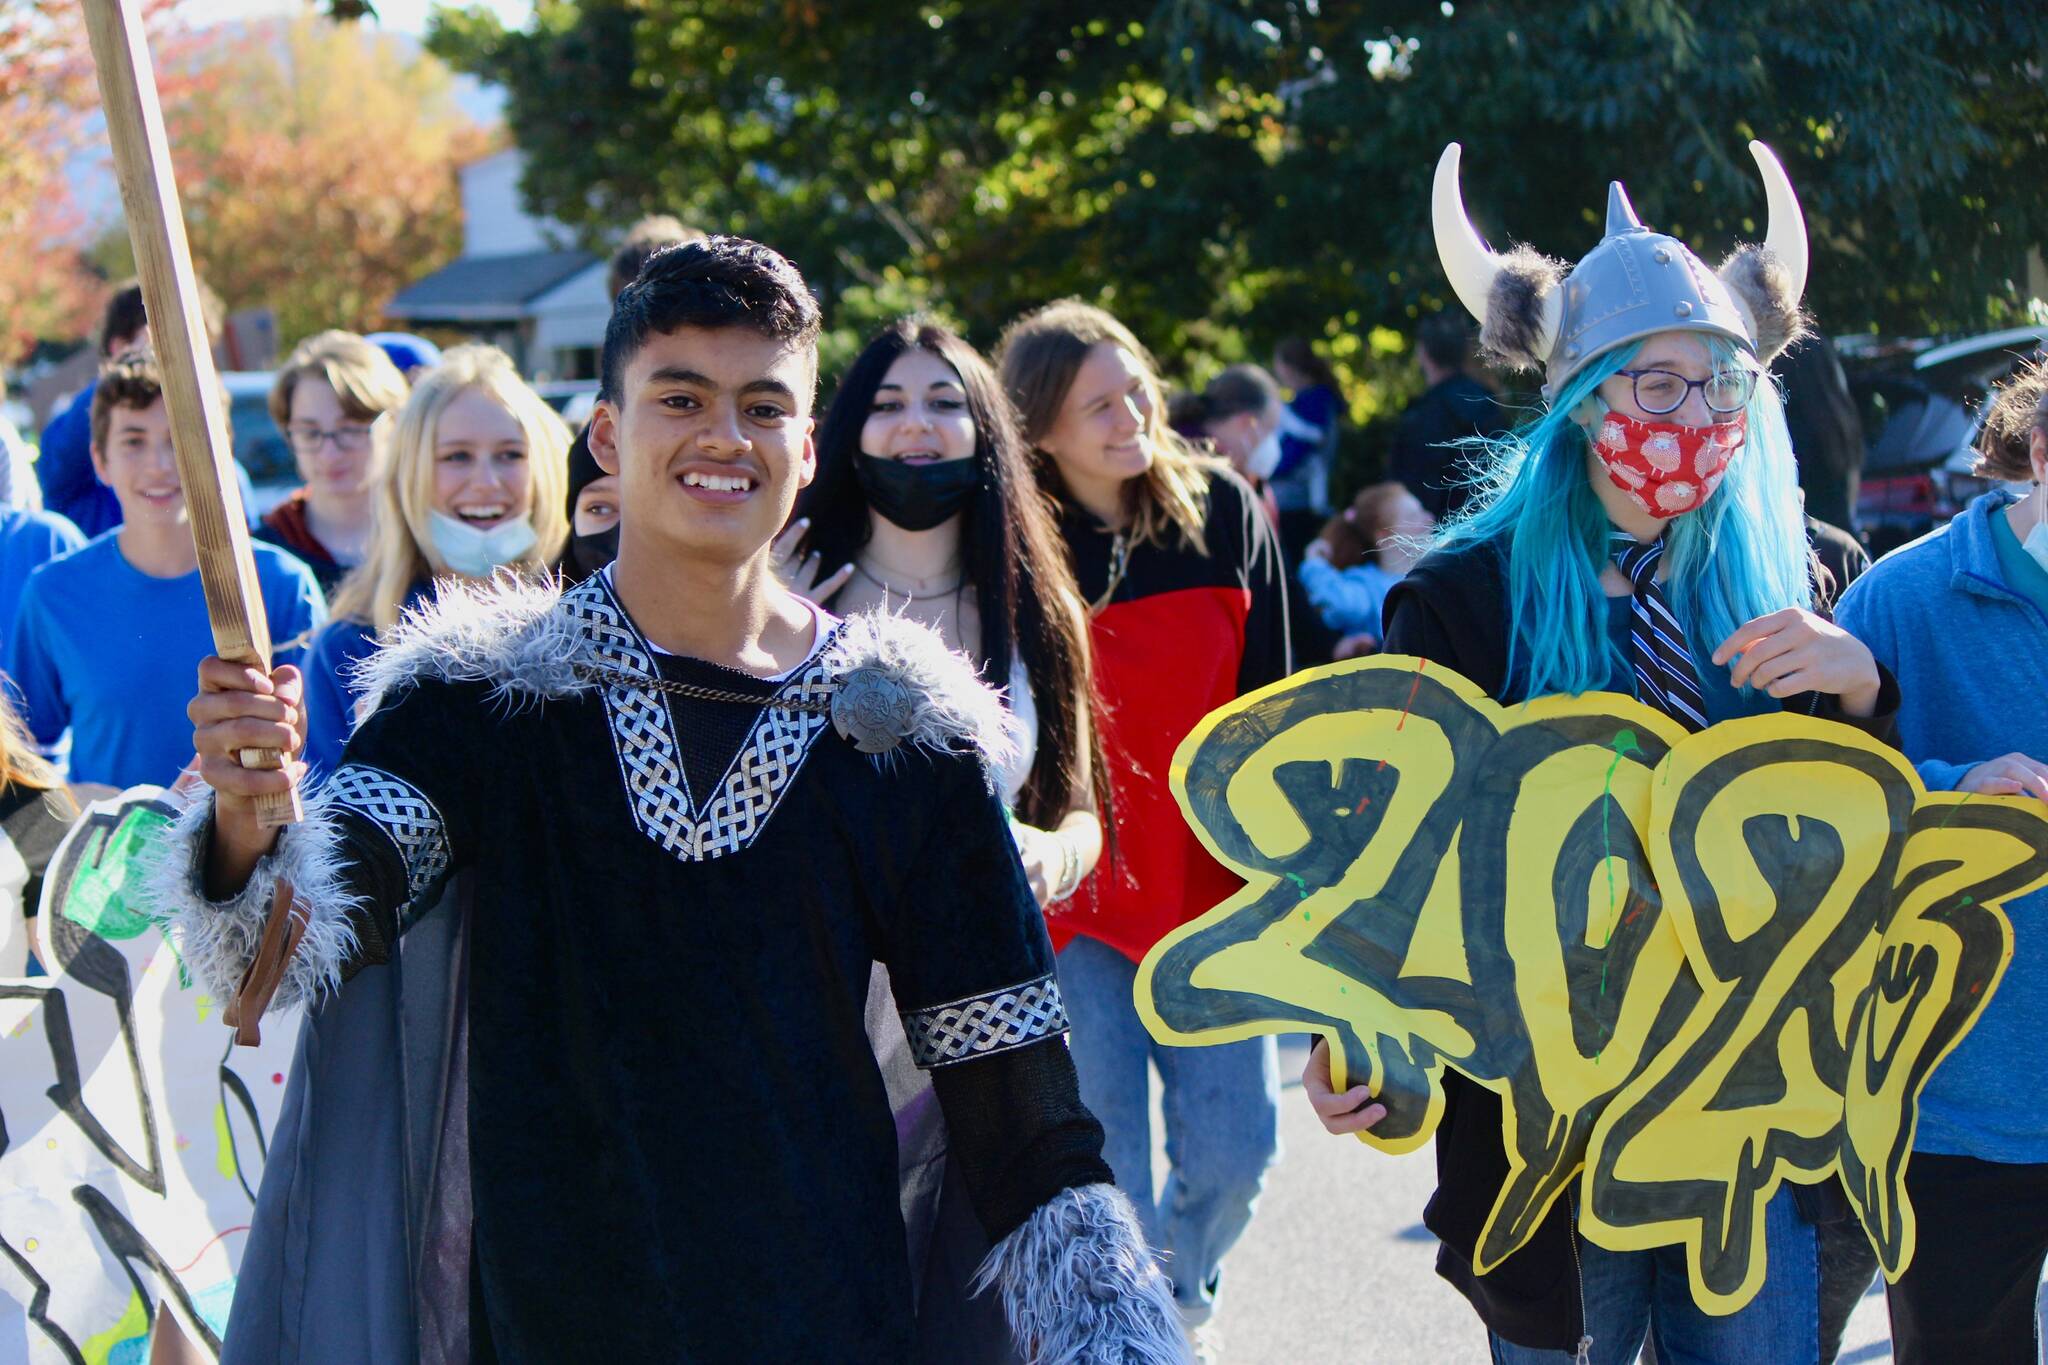 Corey Wiscomb photo
Pedro Banderas leads the Junior Class Float down Main St. for the Homecoming Parade.